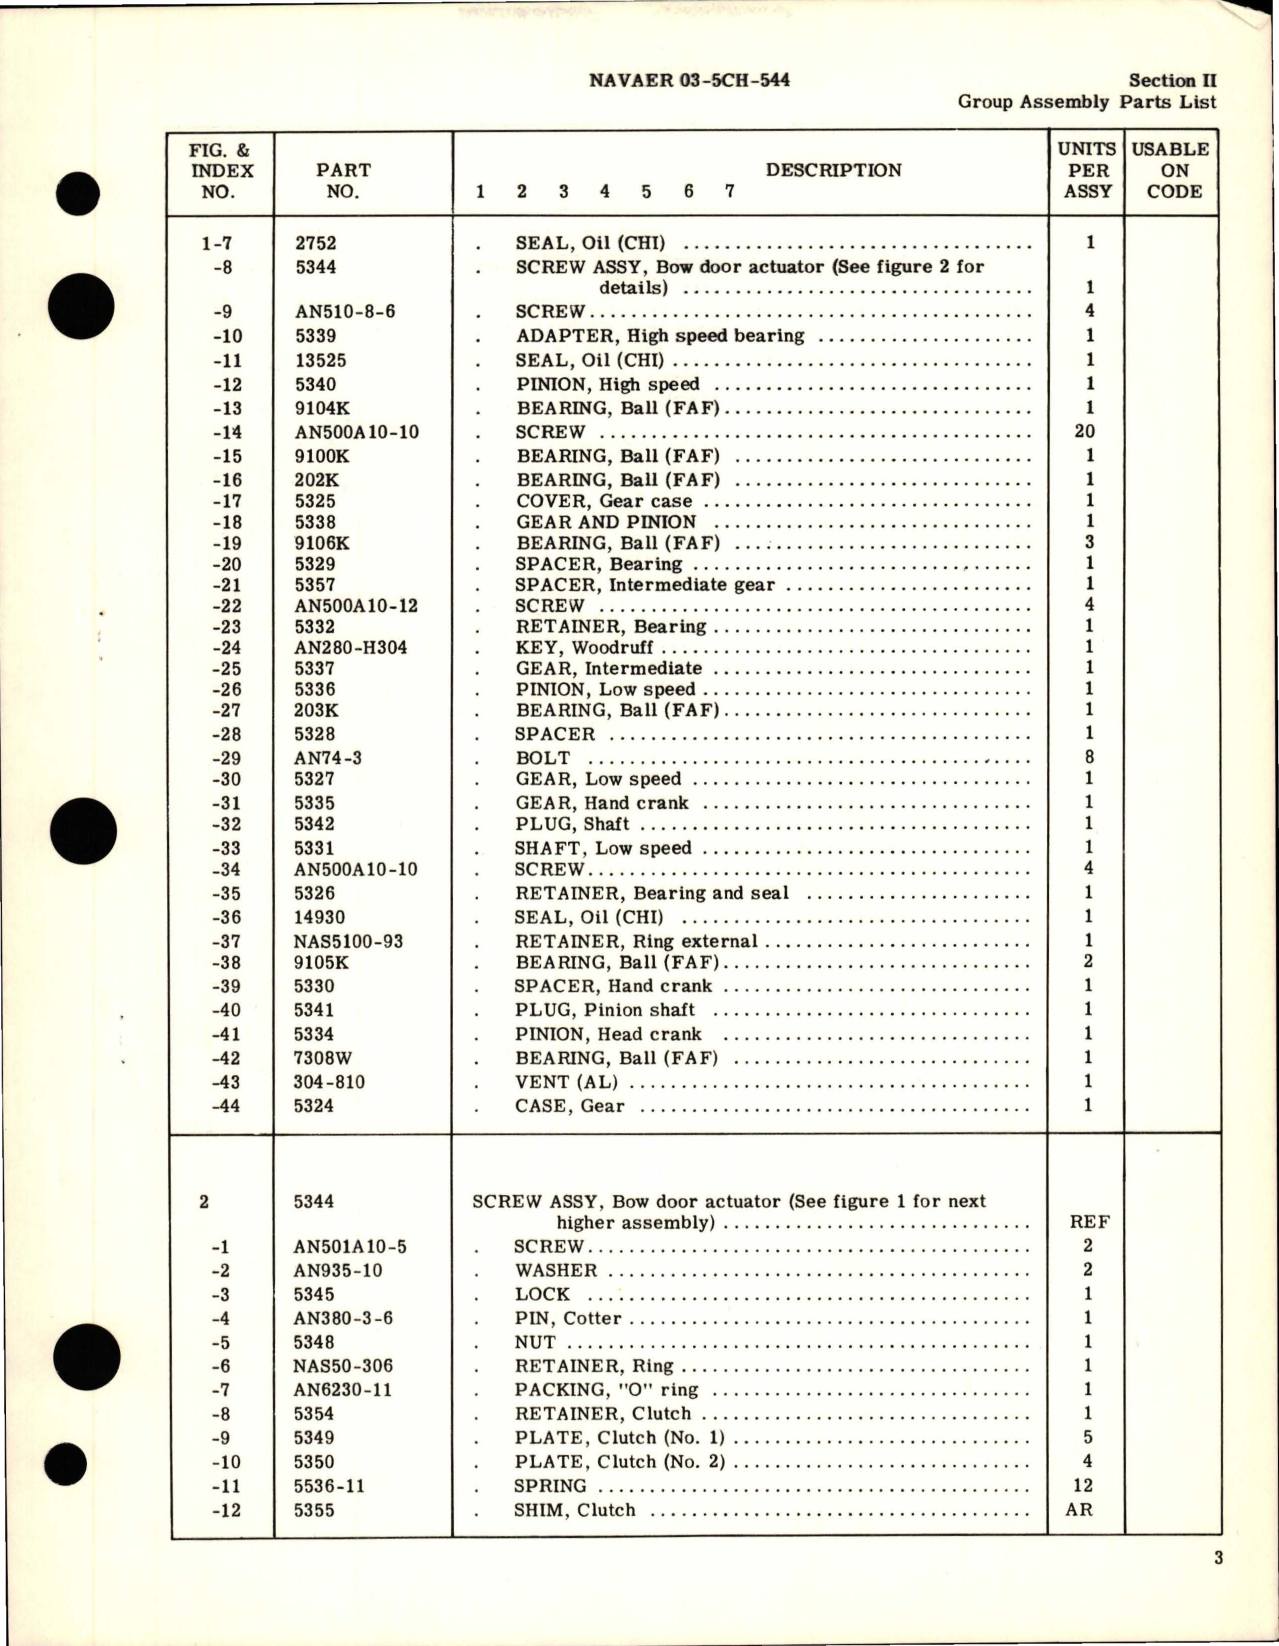 Sample page 5 from AirCorps Library document: Illustrated Parts Breakdown for Bow Door Actuator - Part 5074